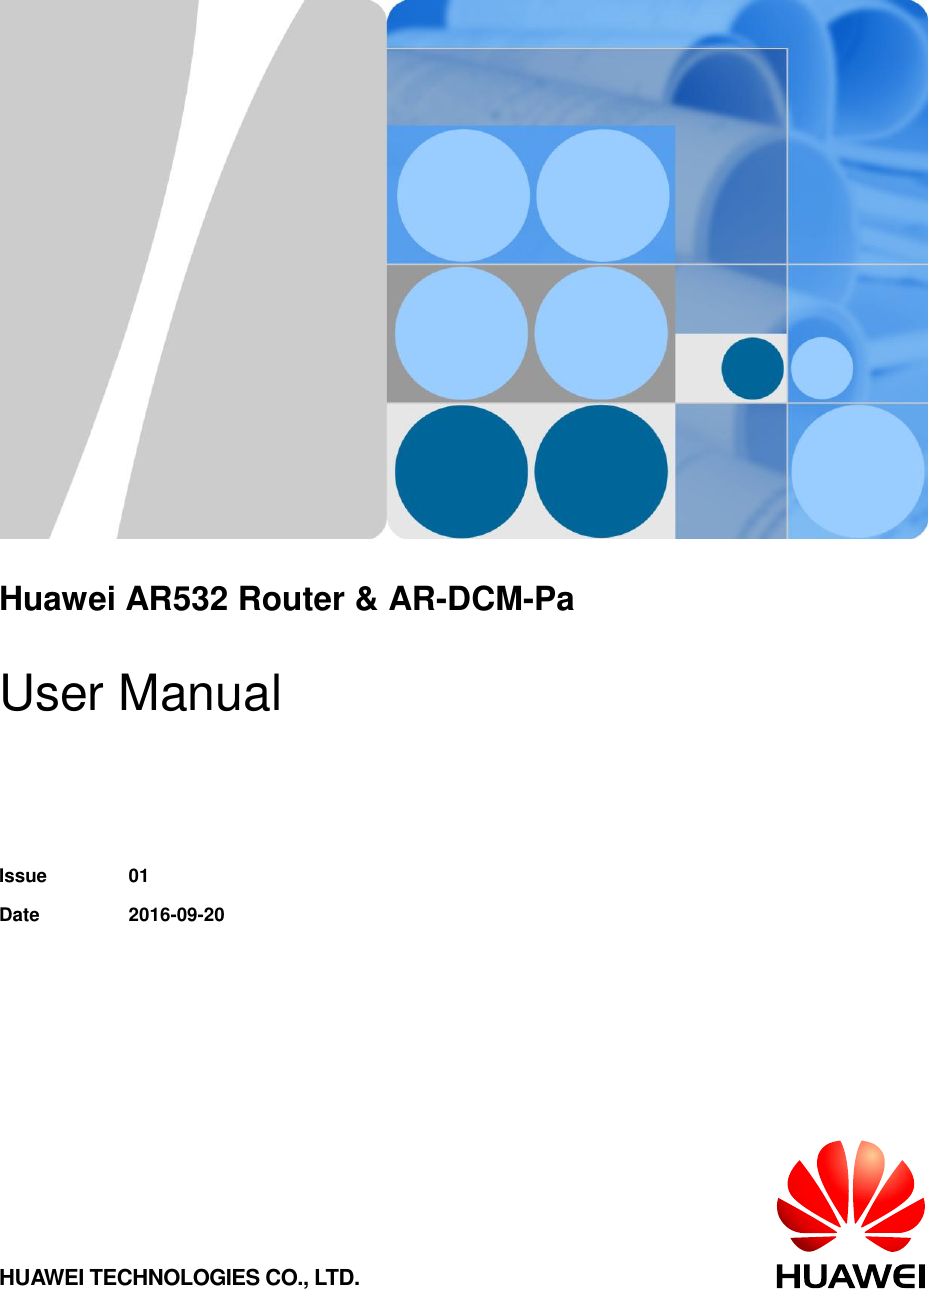         Huawei AR532 Router &amp; AR-DCM-Pa  User Manual   Issue 01 Date 2016-09-20 HUAWEI TECHNOLOGIES CO., LTD. 